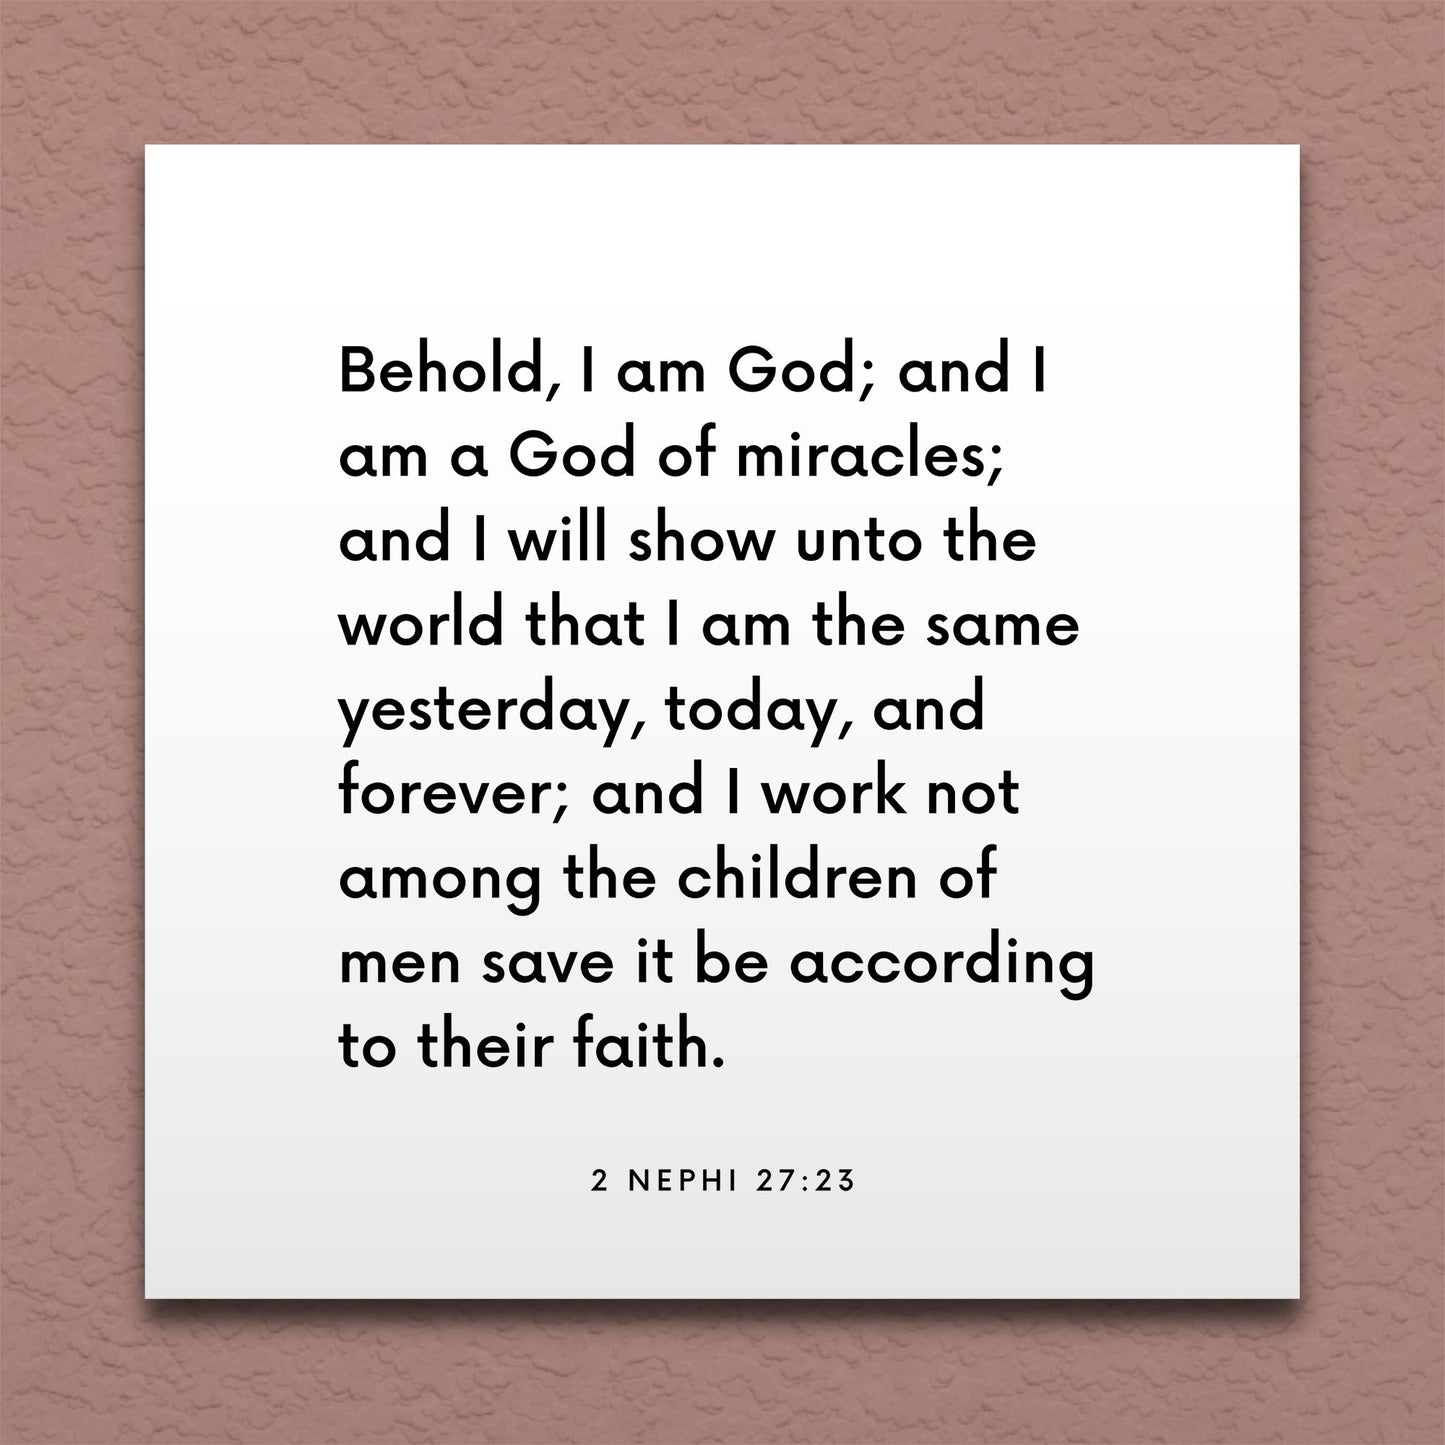 Wall-mounted scripture tile for 2 Nephi 27:23 - "Behold, I am God; and I am a God of miracles"